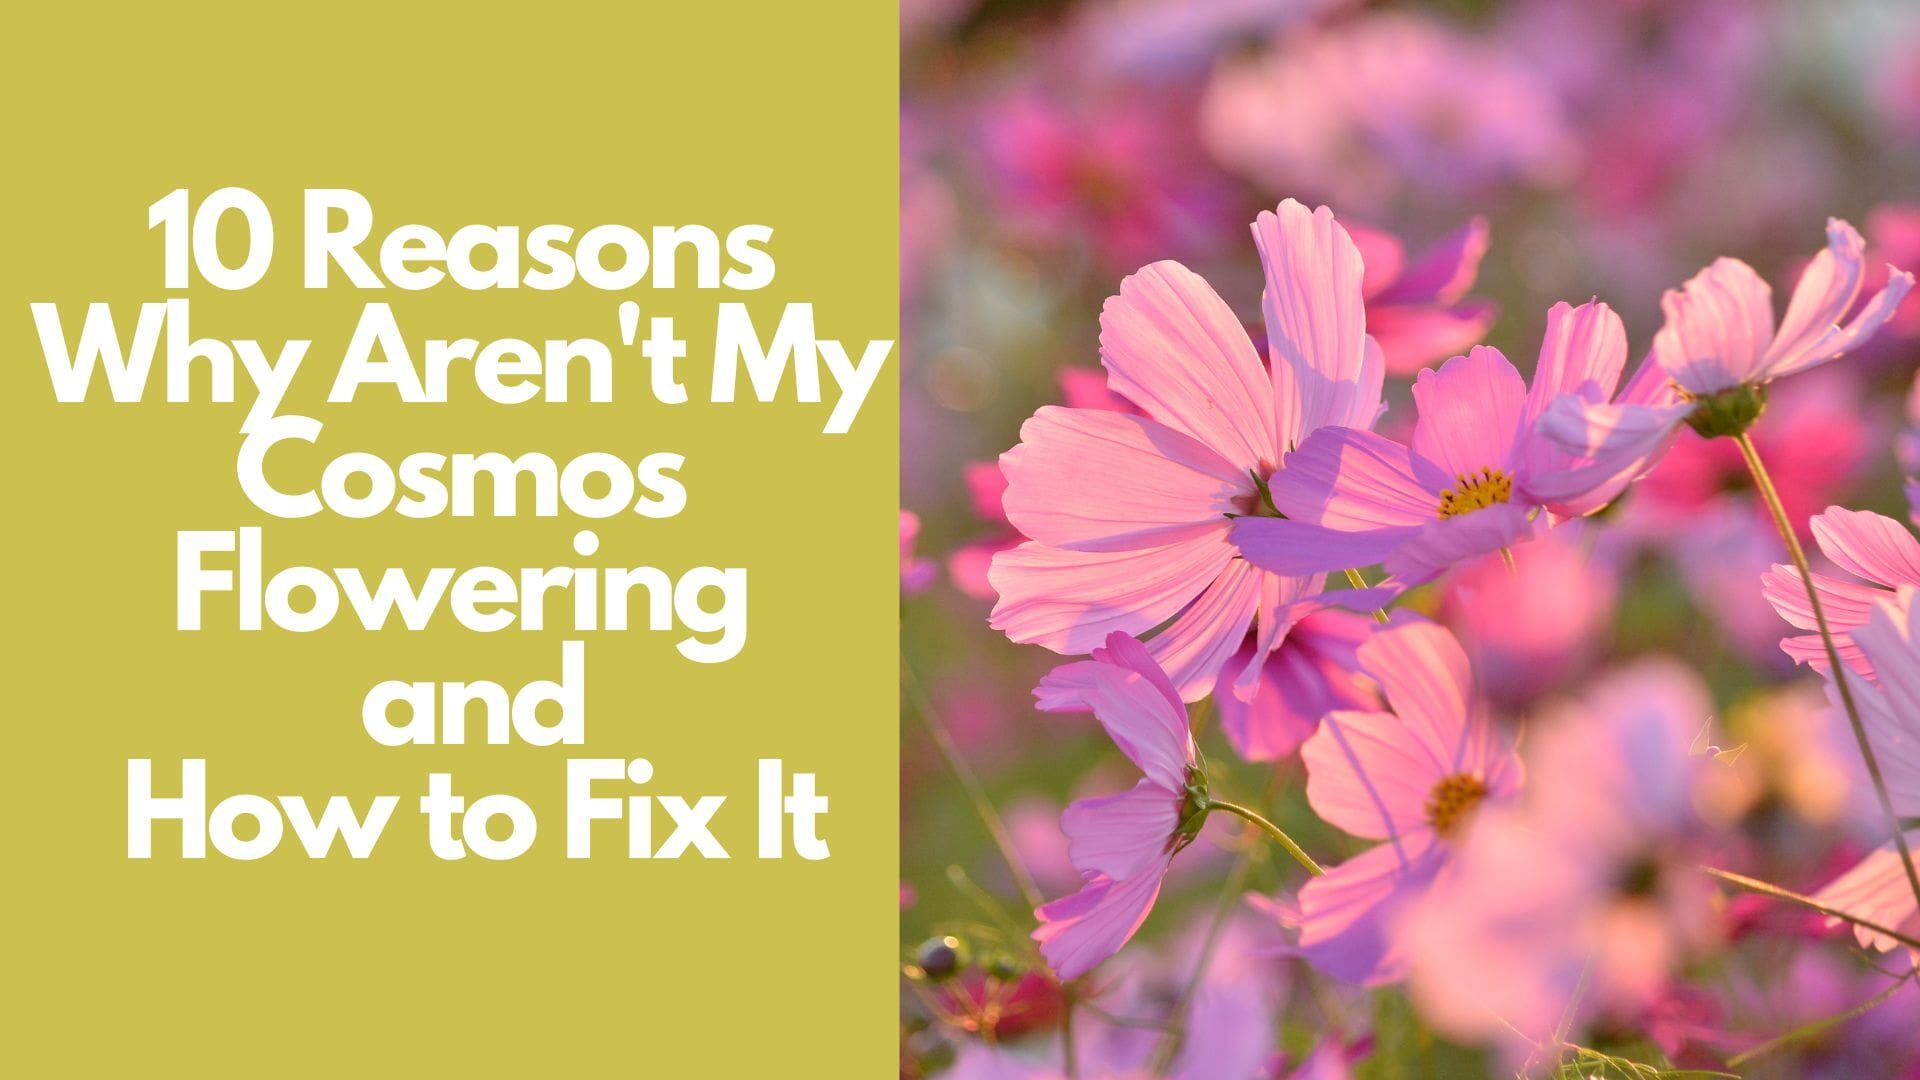 10 Reasons Why Aren't My Cosmos Flowering and How to Fix It